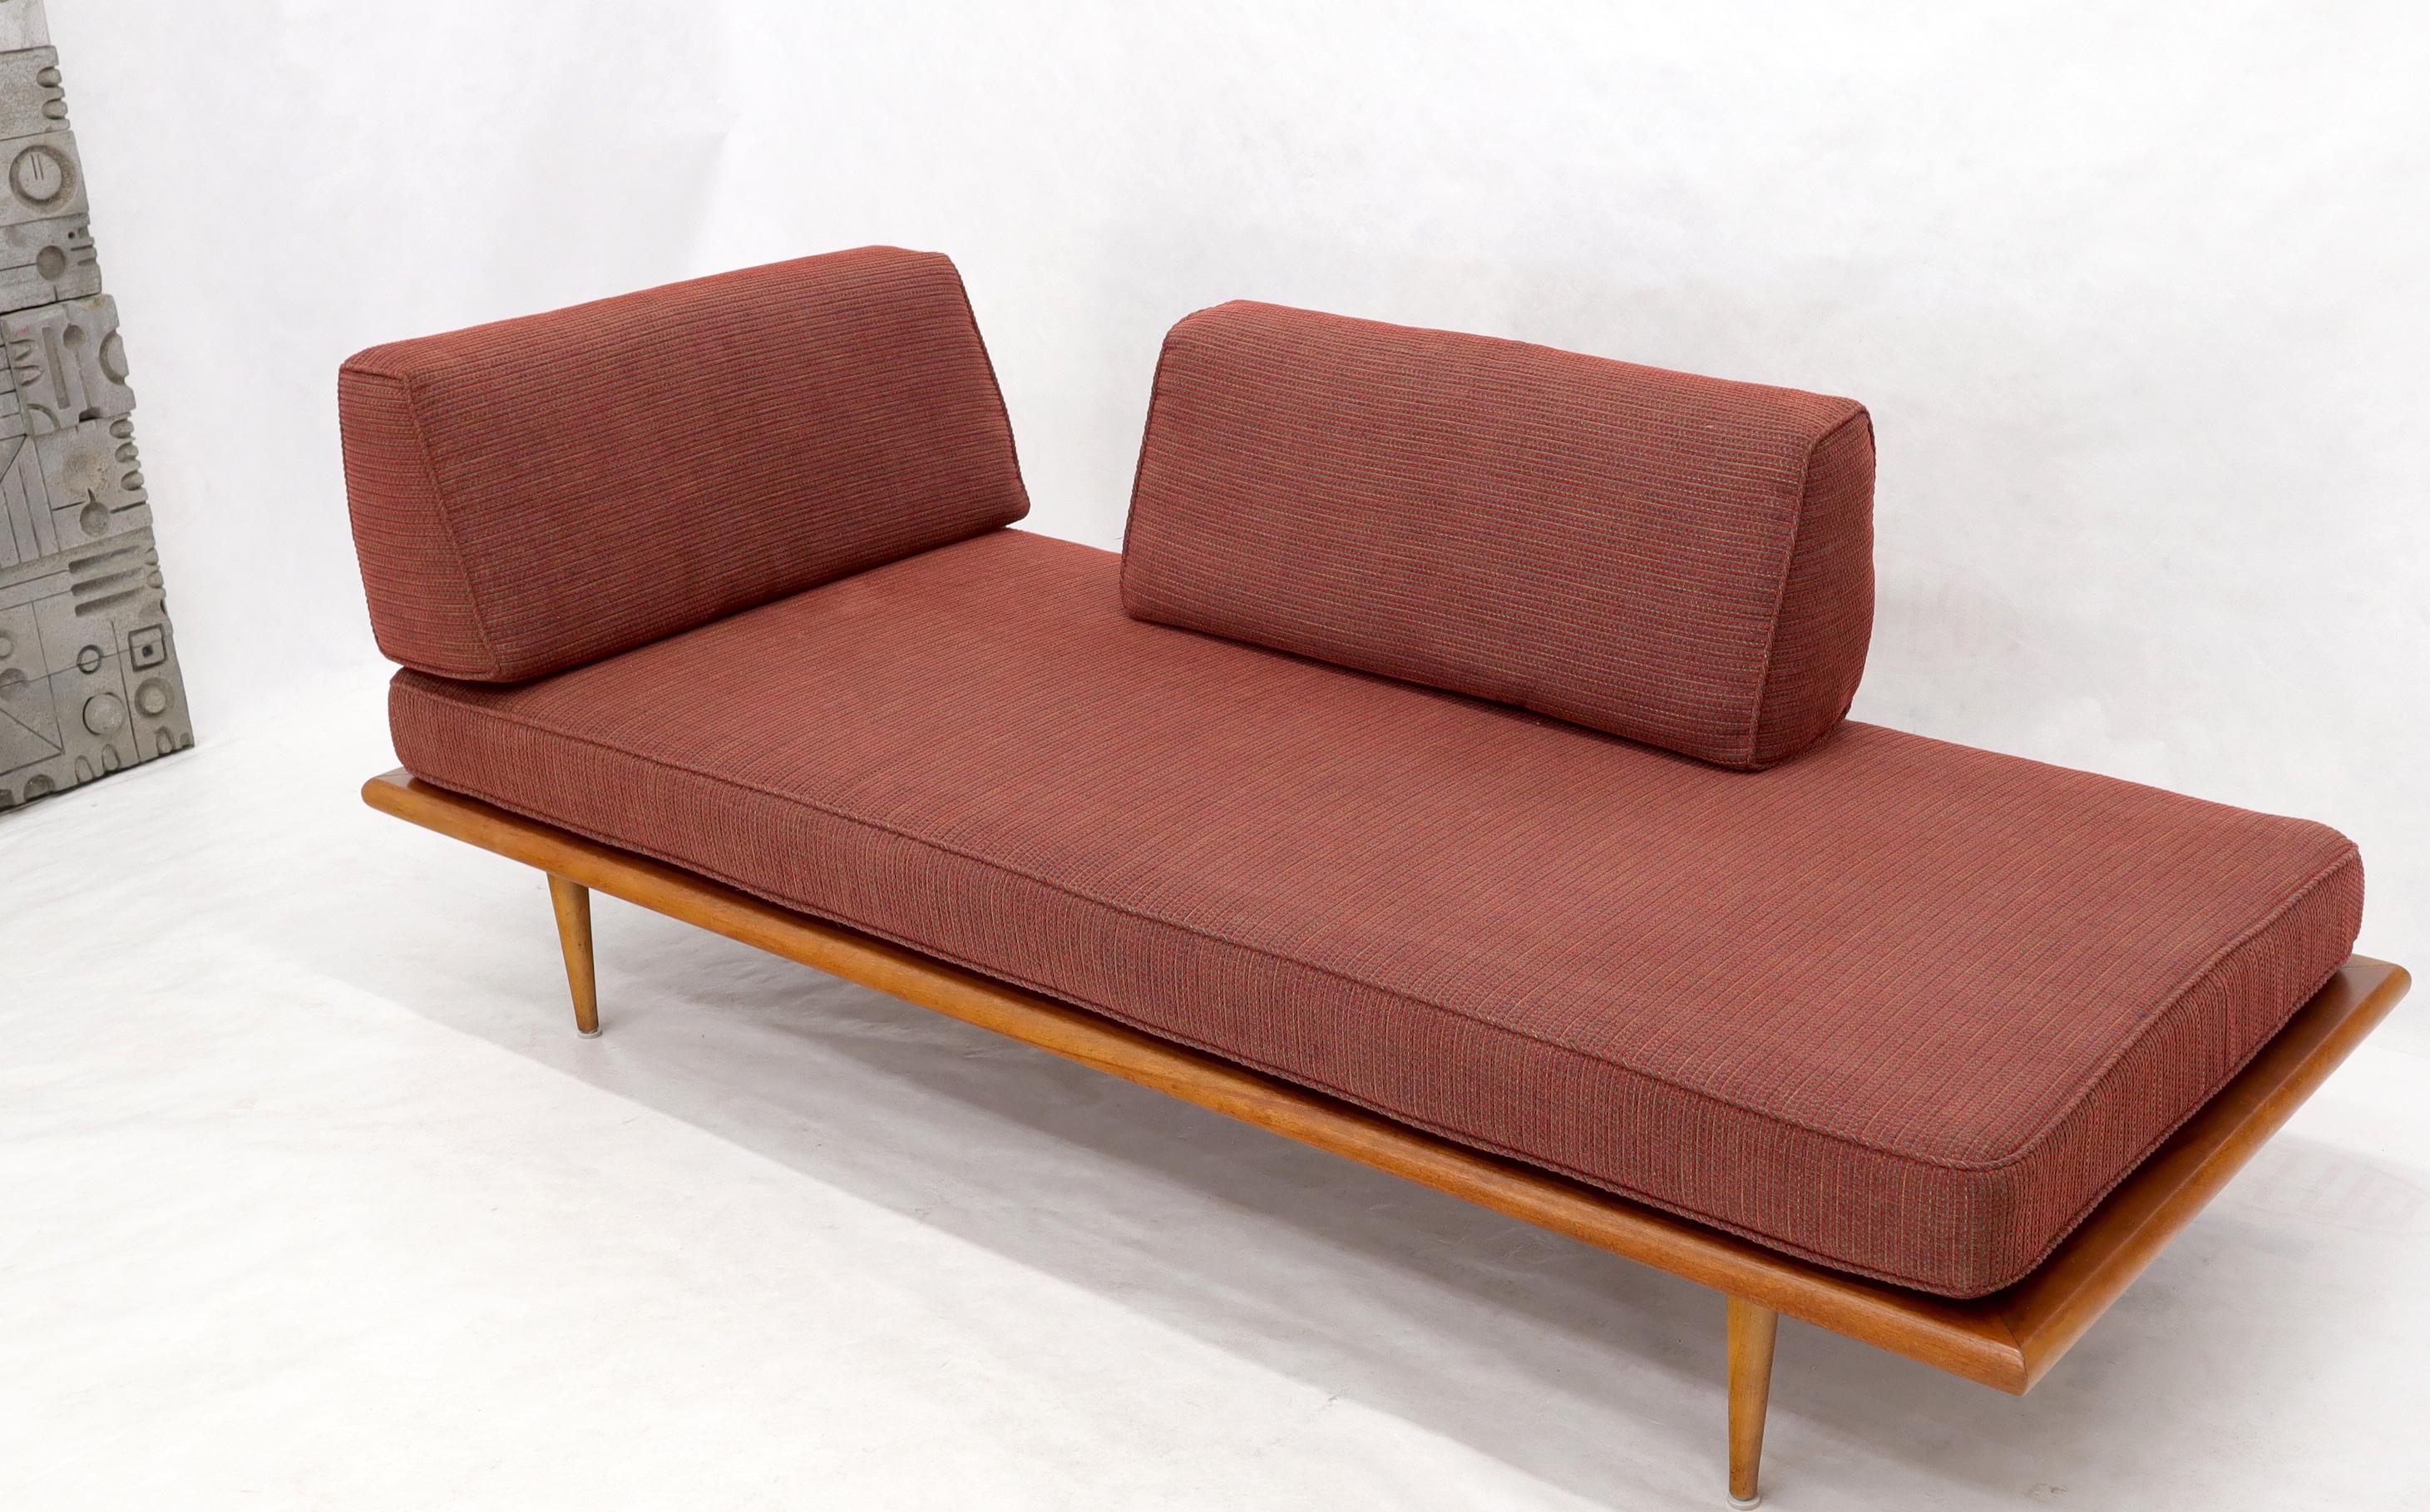 20th Century Vintage George Nelson for Herman Miller Daybed Cot Sofa Chaise Lounge